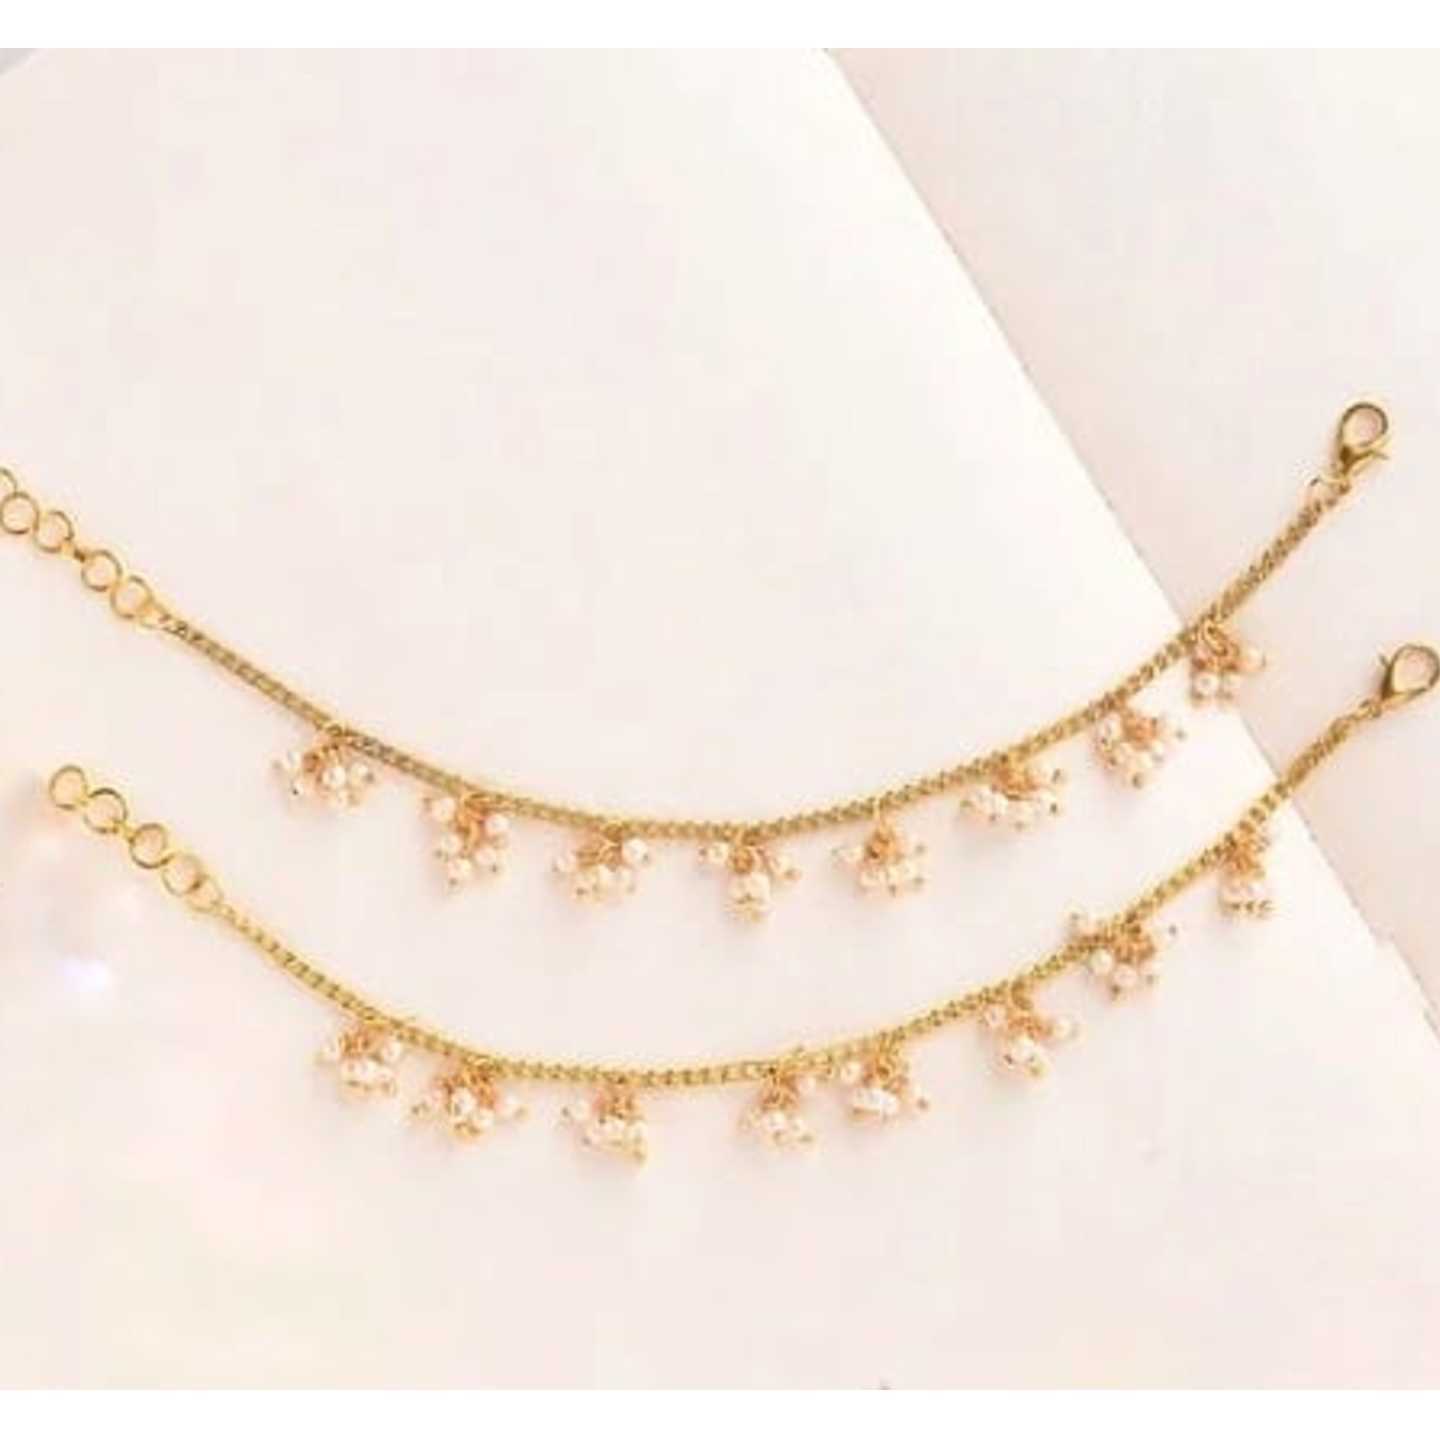 Gold Tone Beaded Kundan Anklets With Pearls